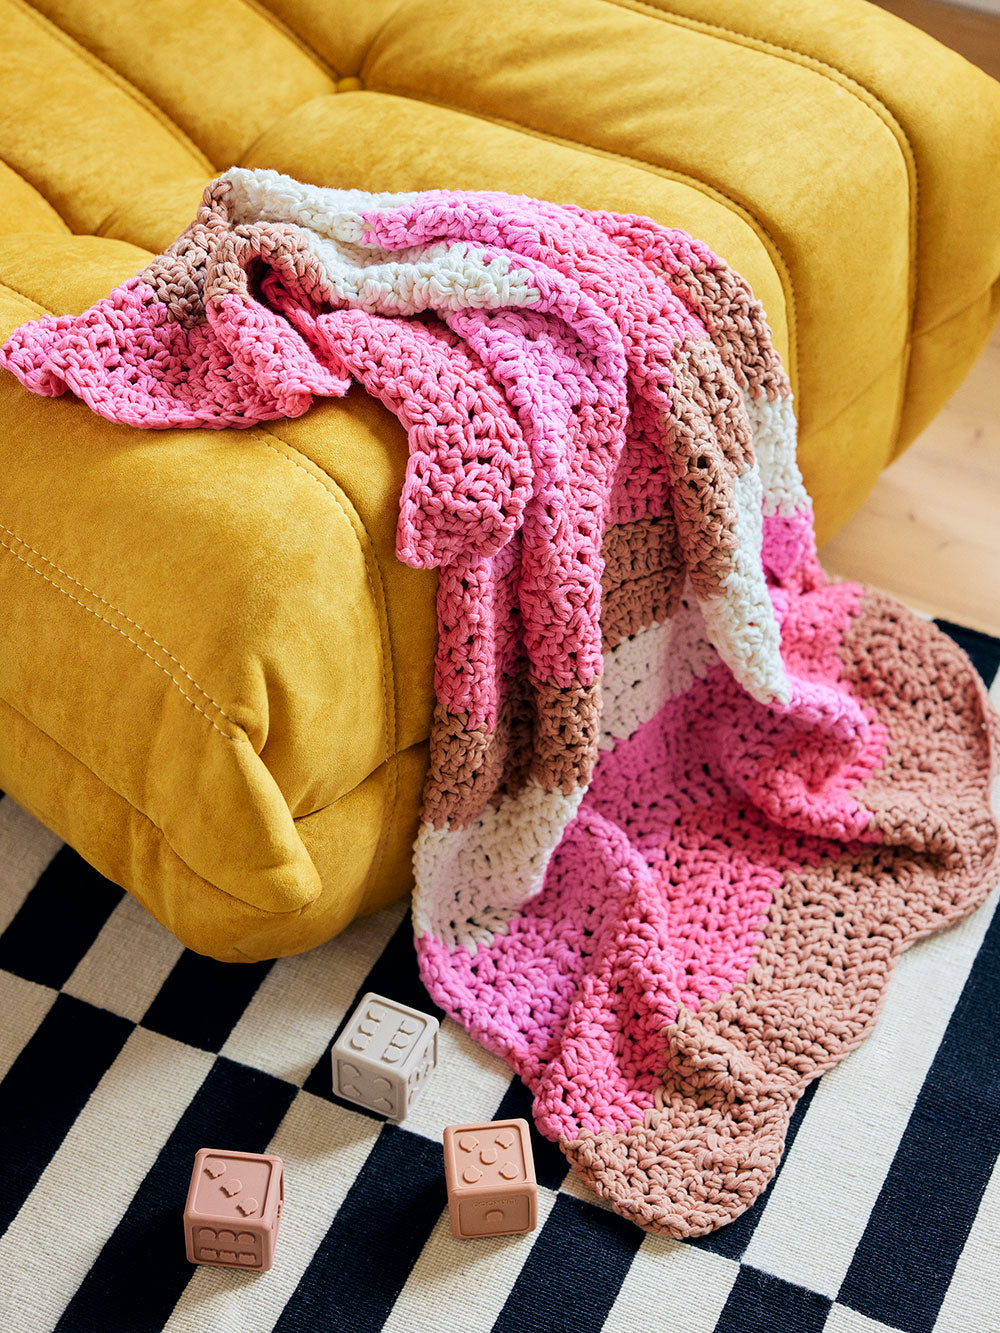 Image of Margot wave crochet baby blanket draped over a yellow ottoman.